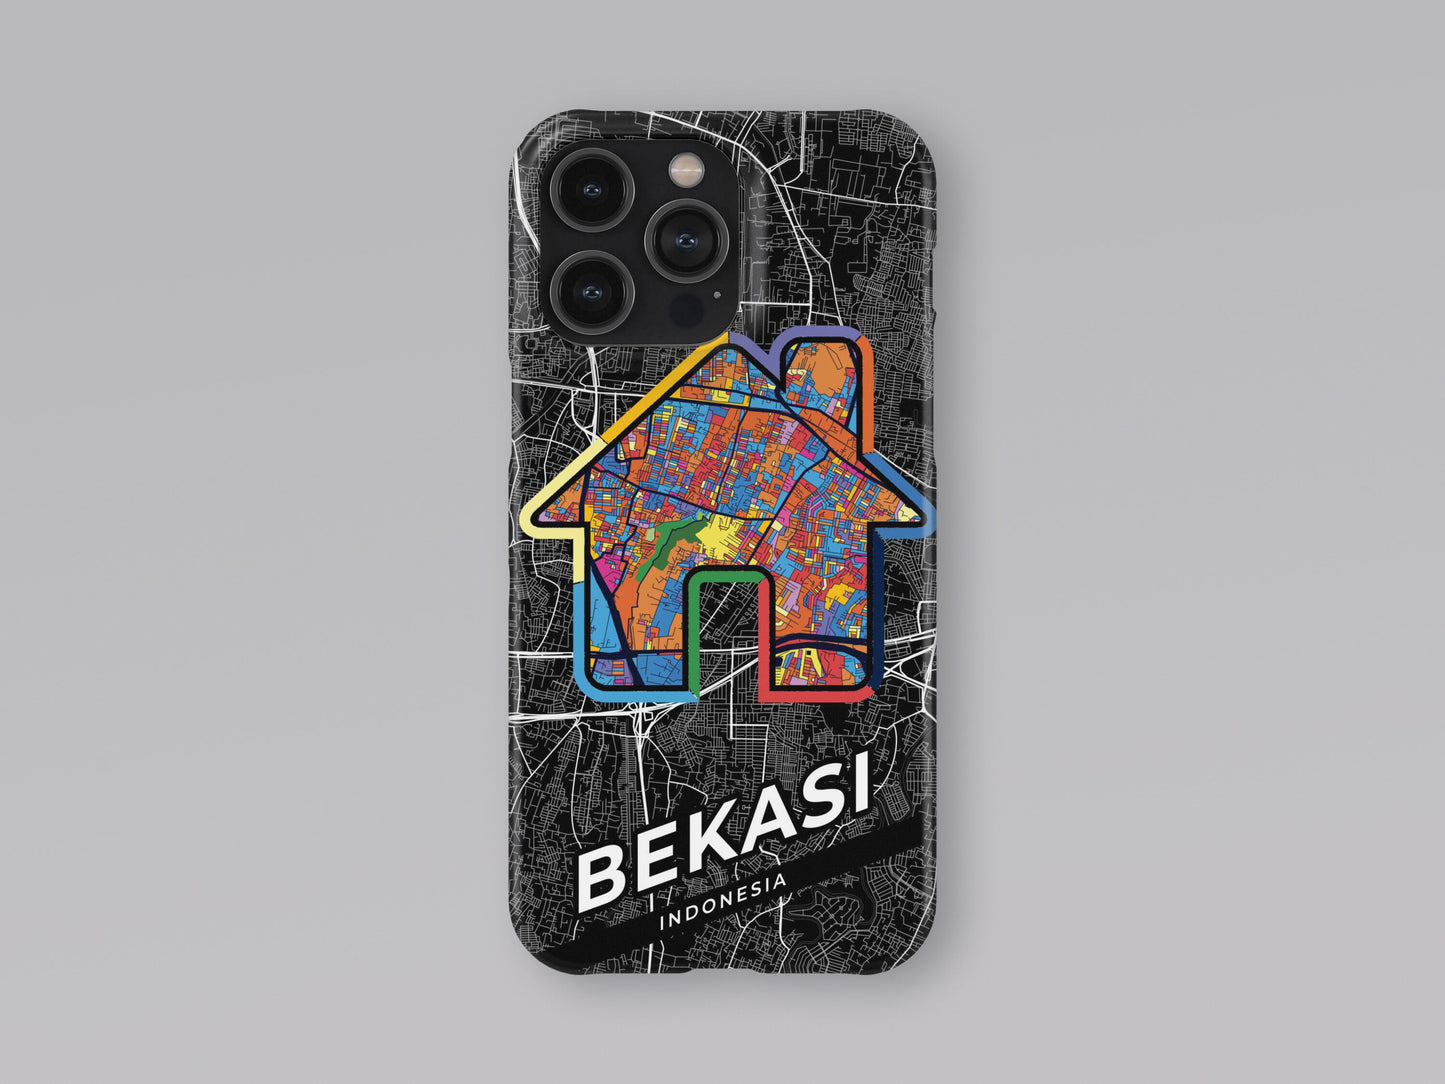 Bekasi Indonesia slim phone case with colorful icon. Birthday, wedding or housewarming gift. Couple match cases. 3